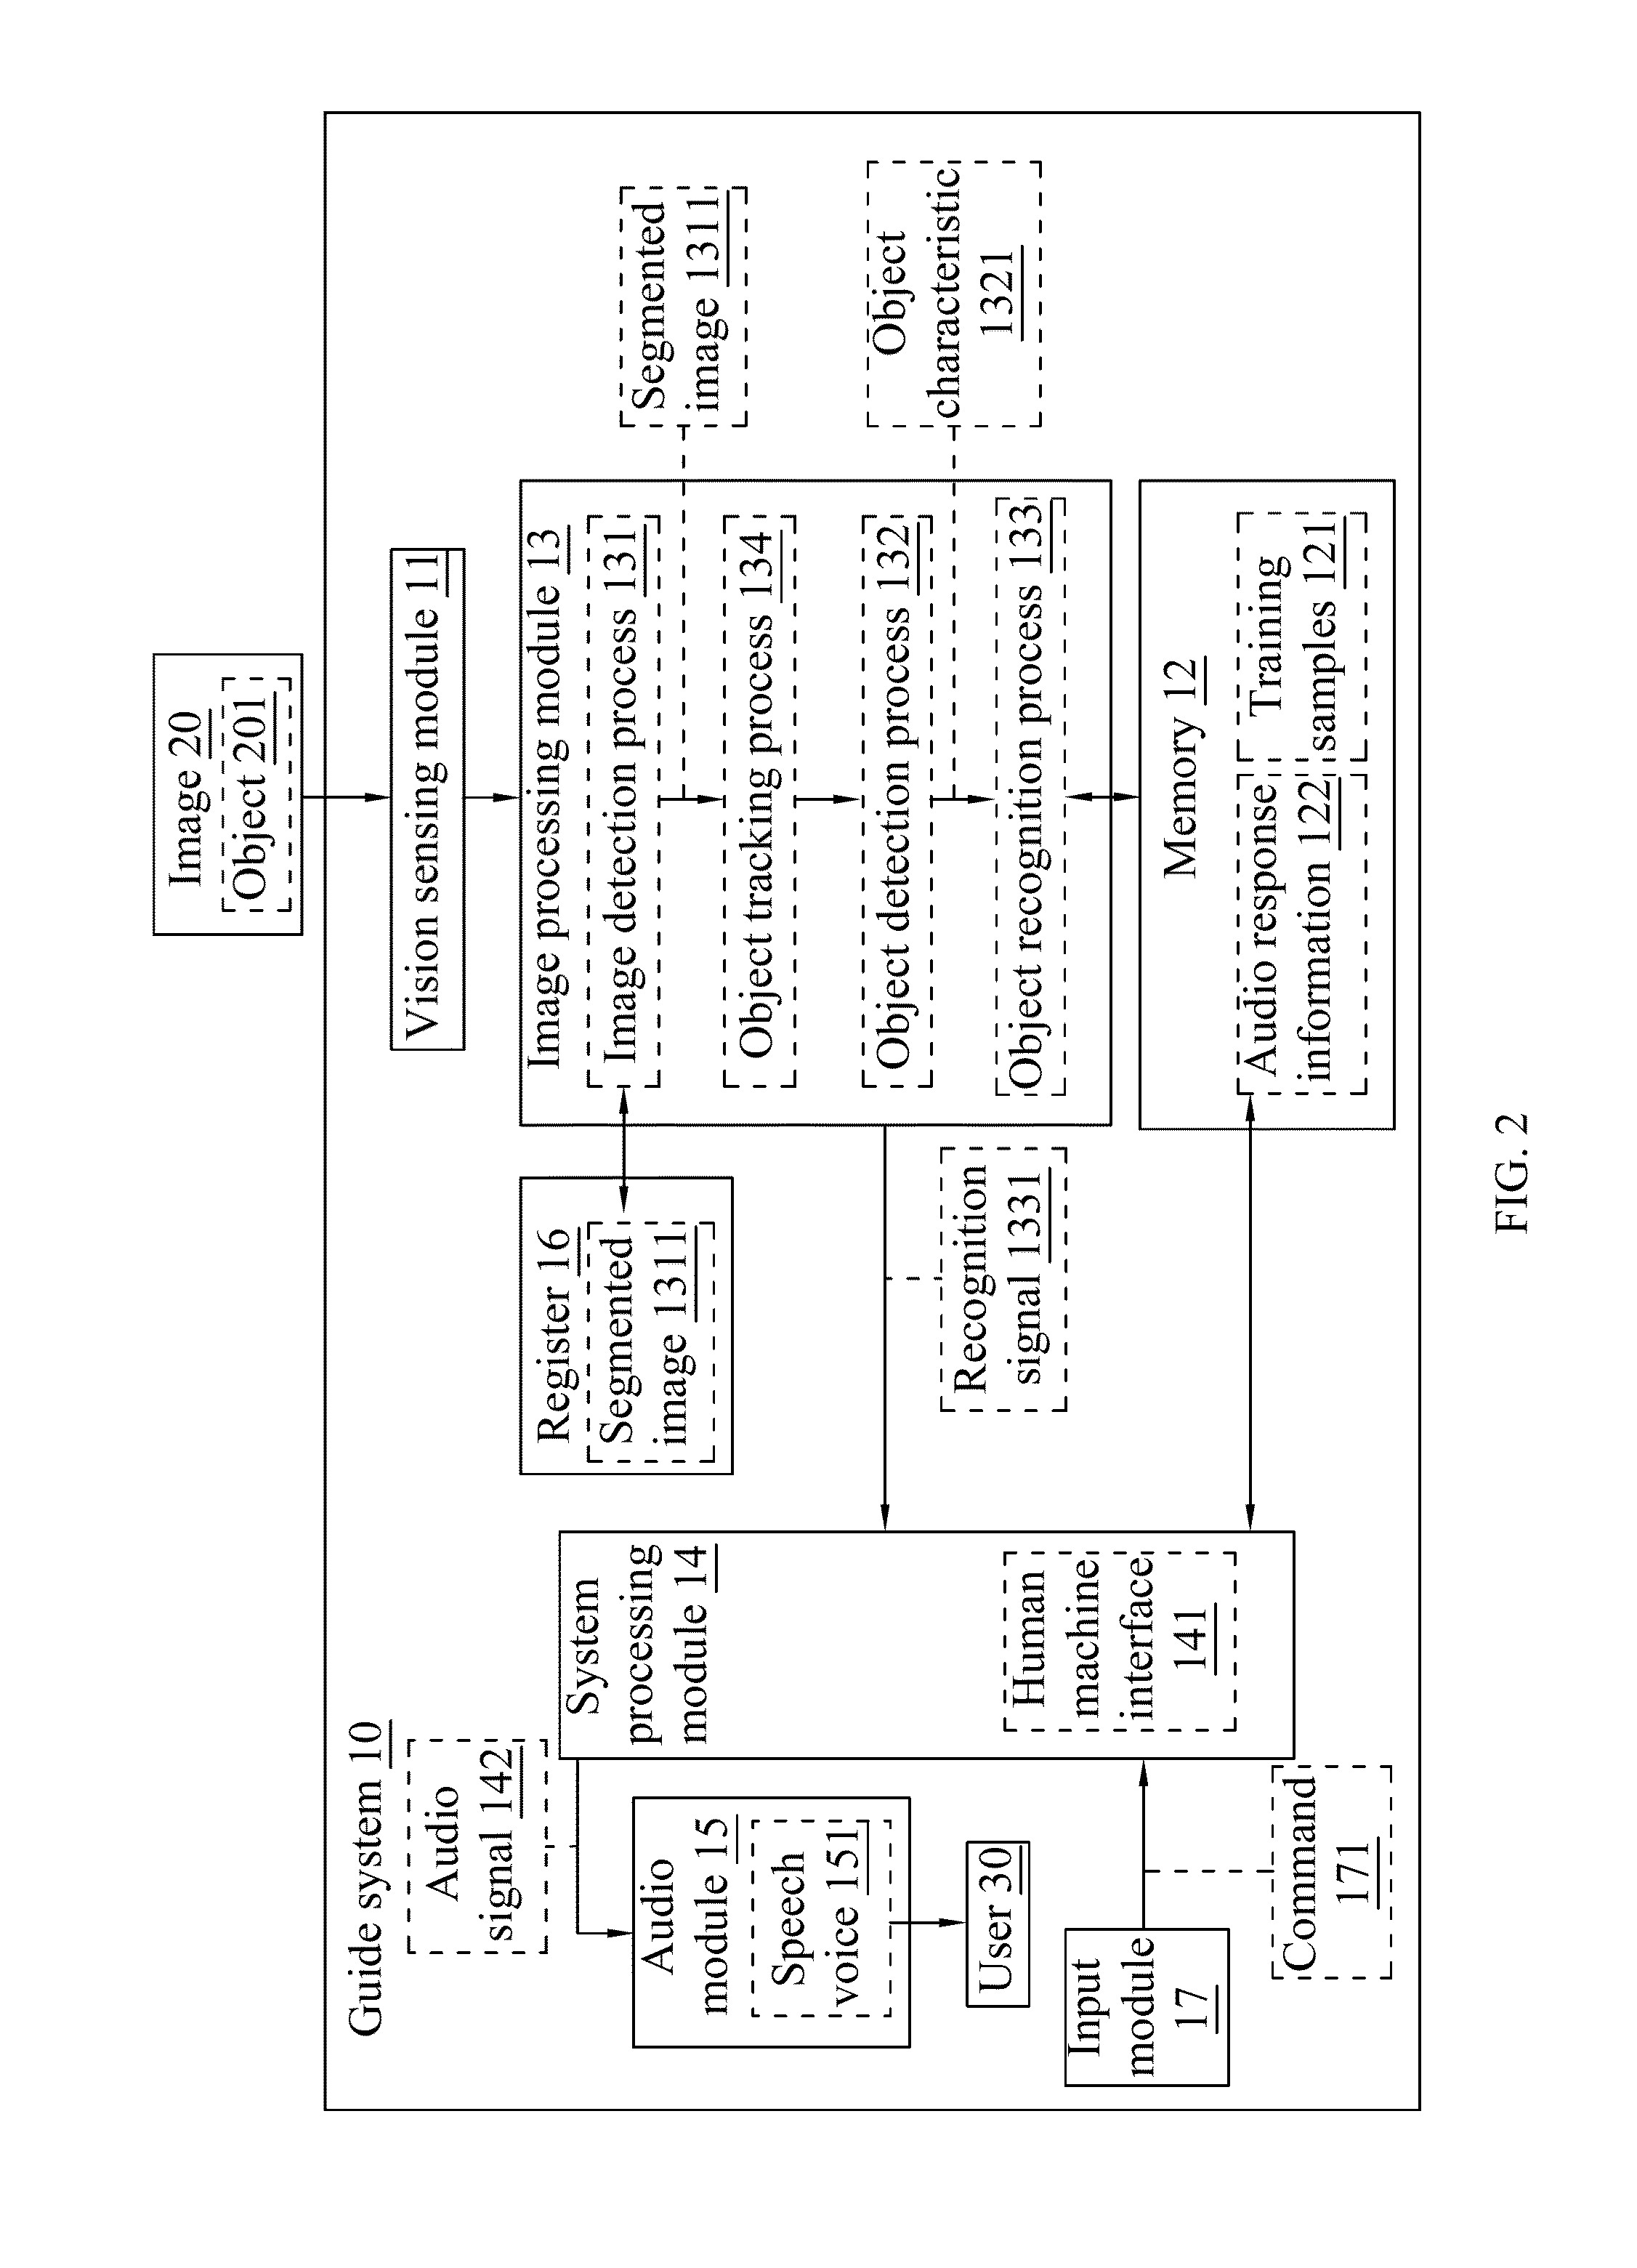 Guide System Having Function of Real-Time Voice Response for the Visually Impaired and Method Thereof